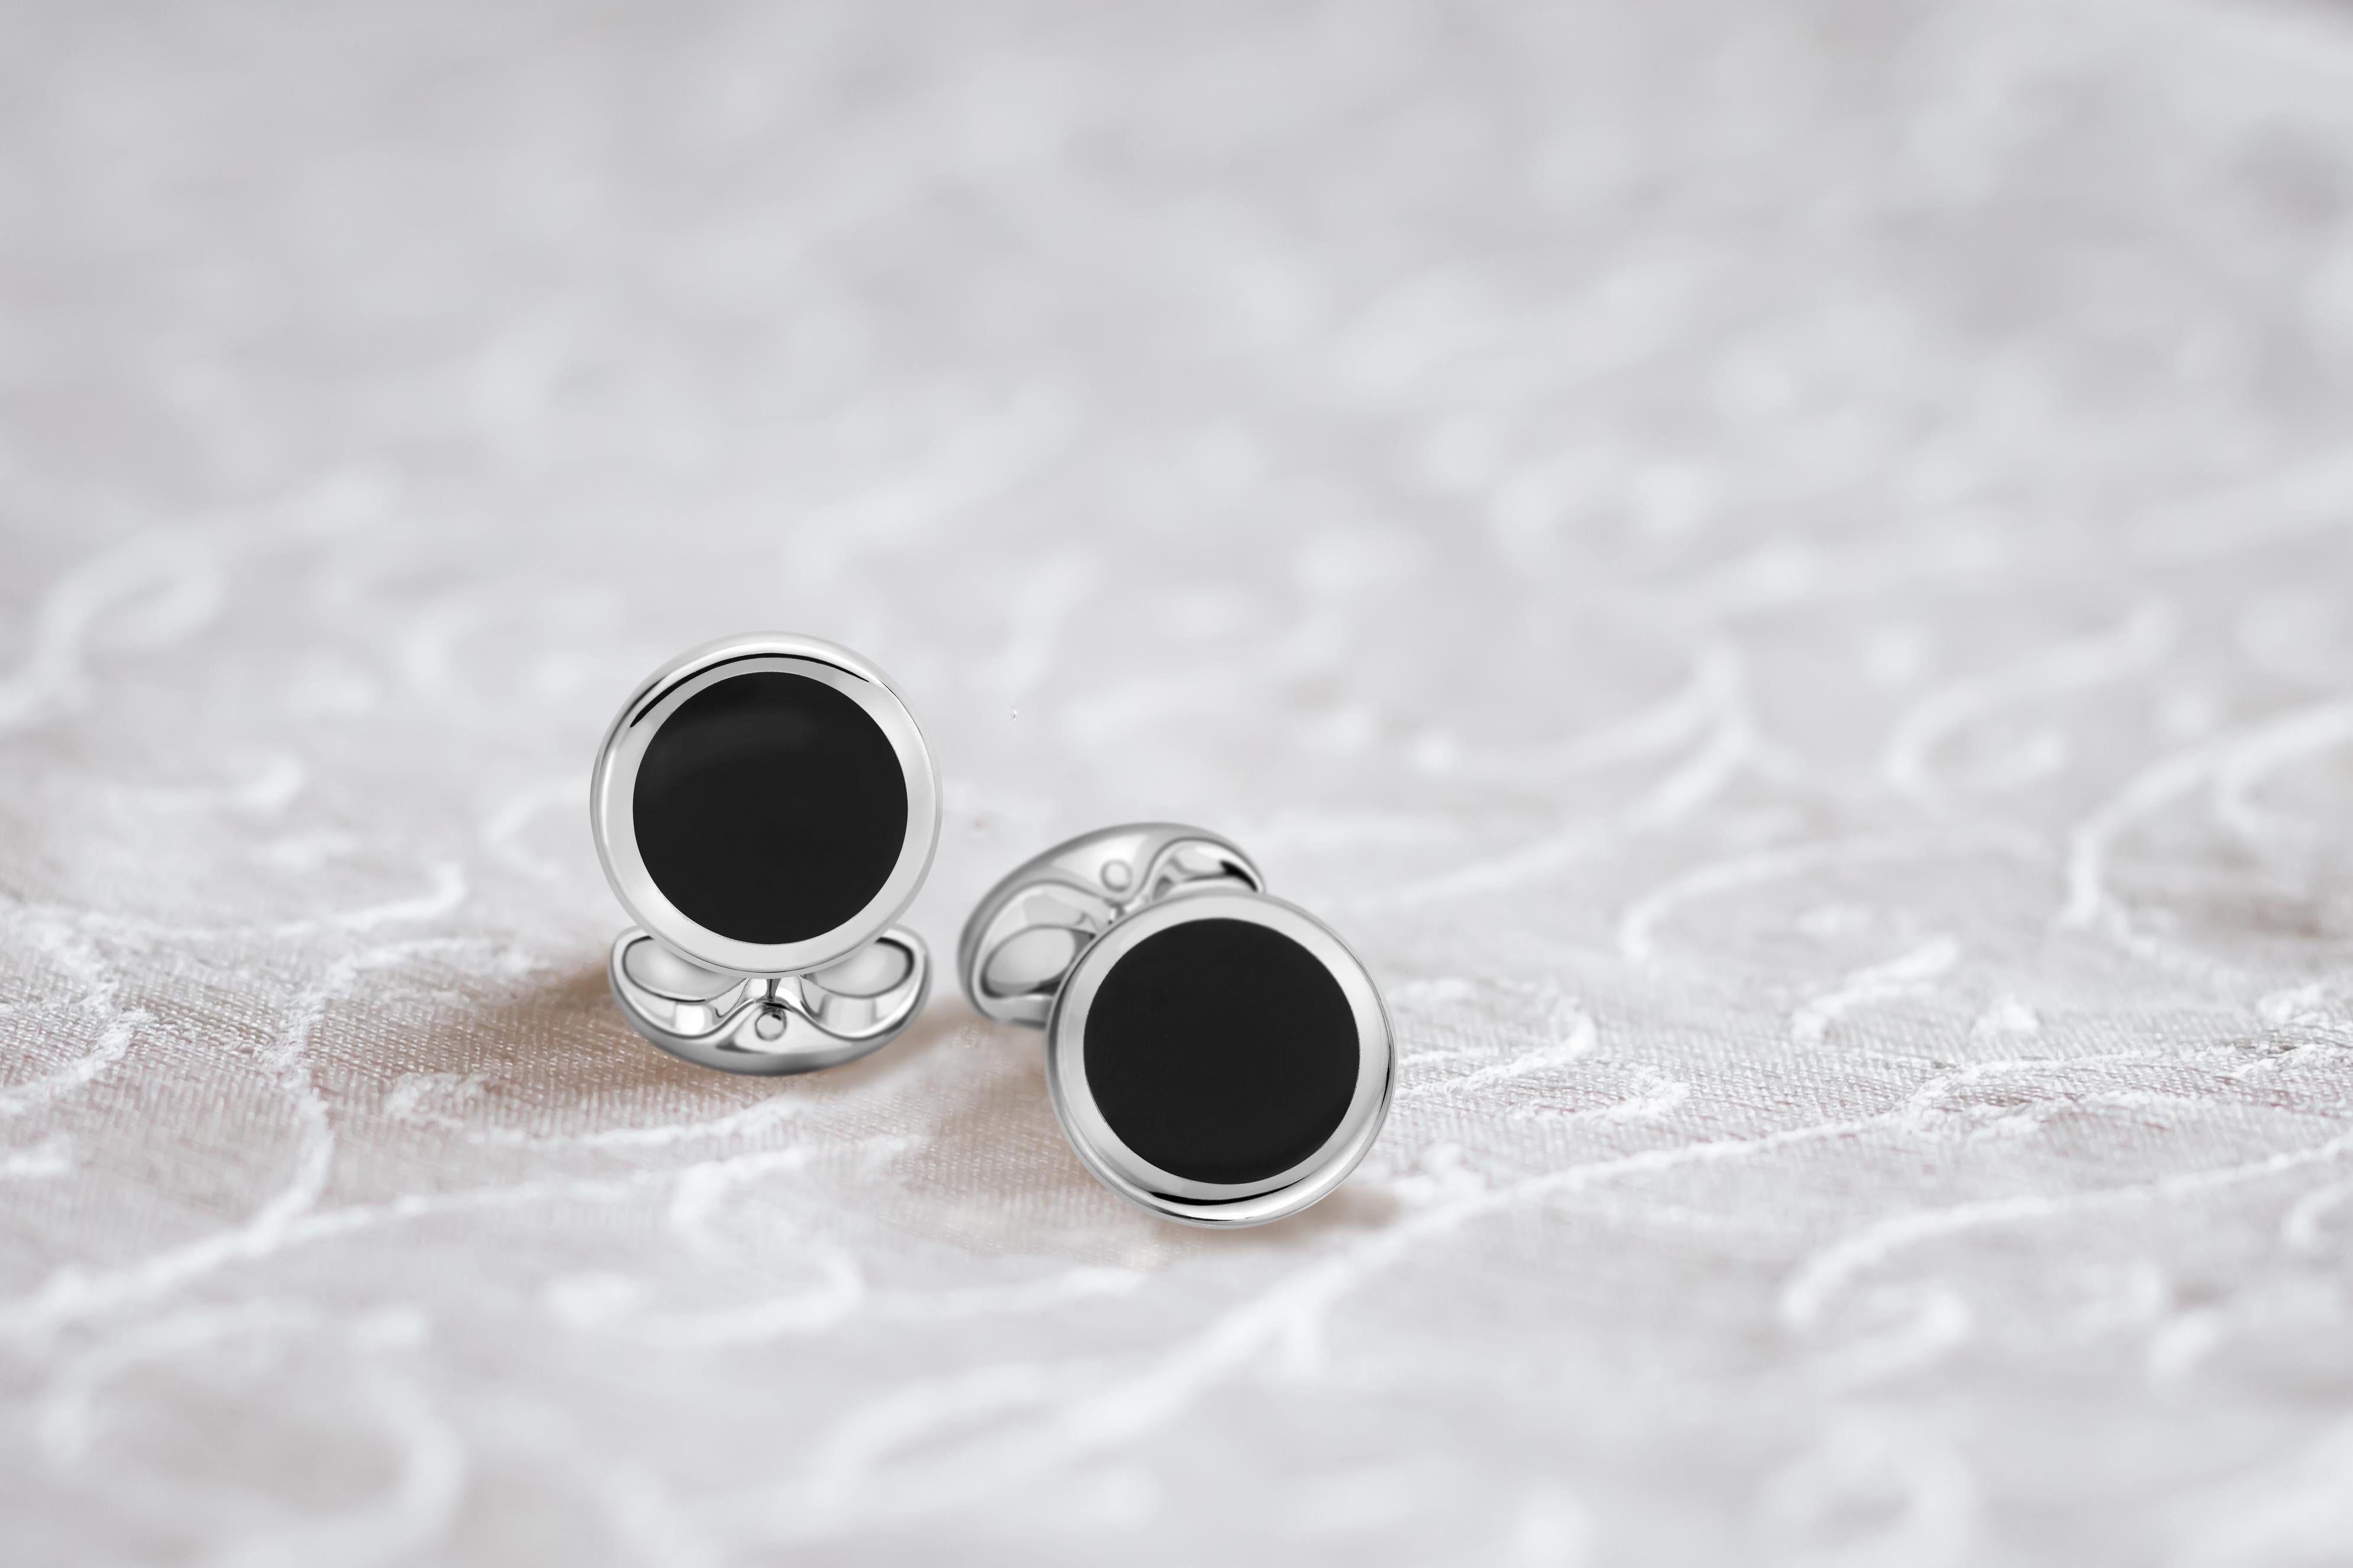 DEAKIN & FRANCIS, Piccadilly Arcade, London

Onyx is a semi-precious stone which was very popular with the Ancient Greeks and Romans. Choose these sterling silver, round cufflinks with striking black onyx inlay for both a classic and contemporary